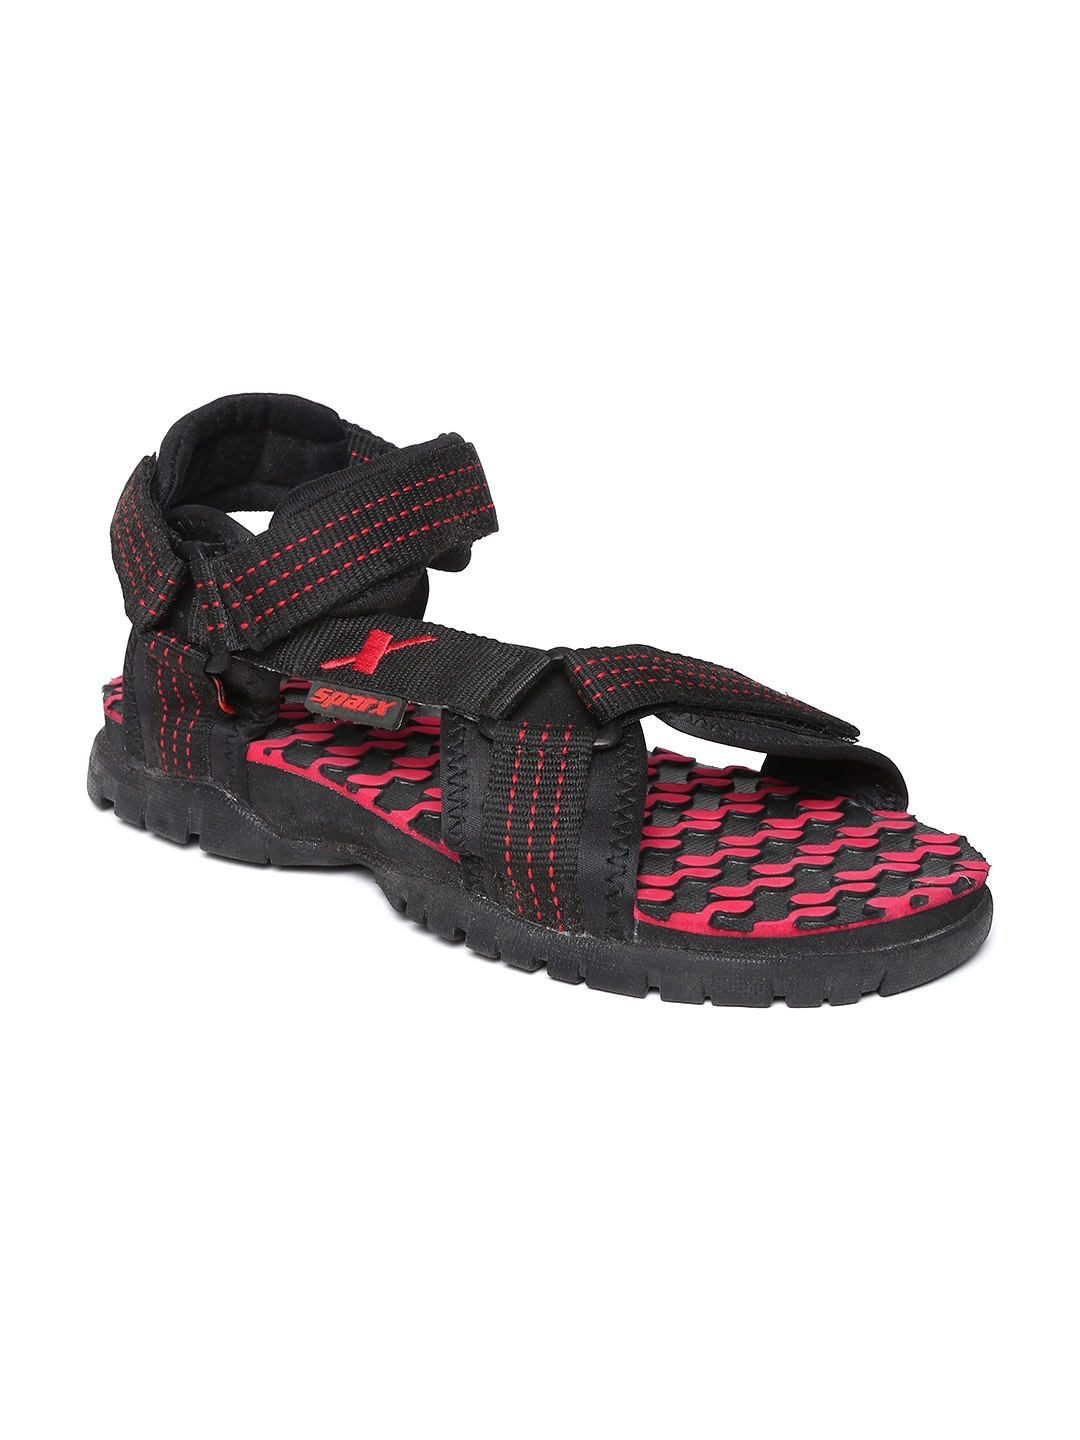 Buy Black Sports Sandals for Men by RED TAPE Online | Ajio.com